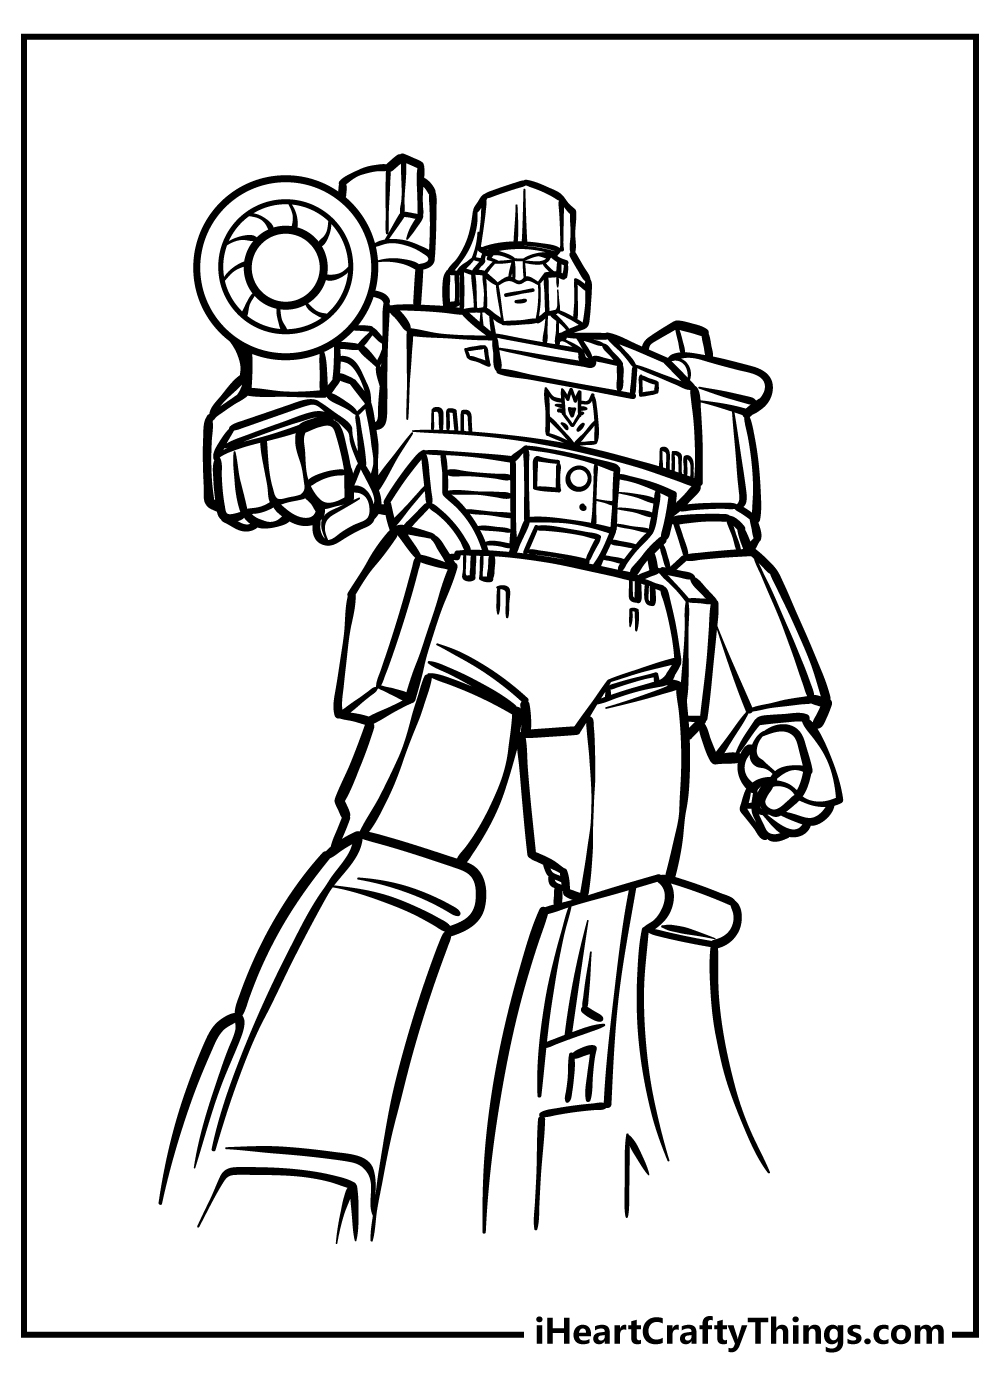 Transformers Coloring Sheet for children free download